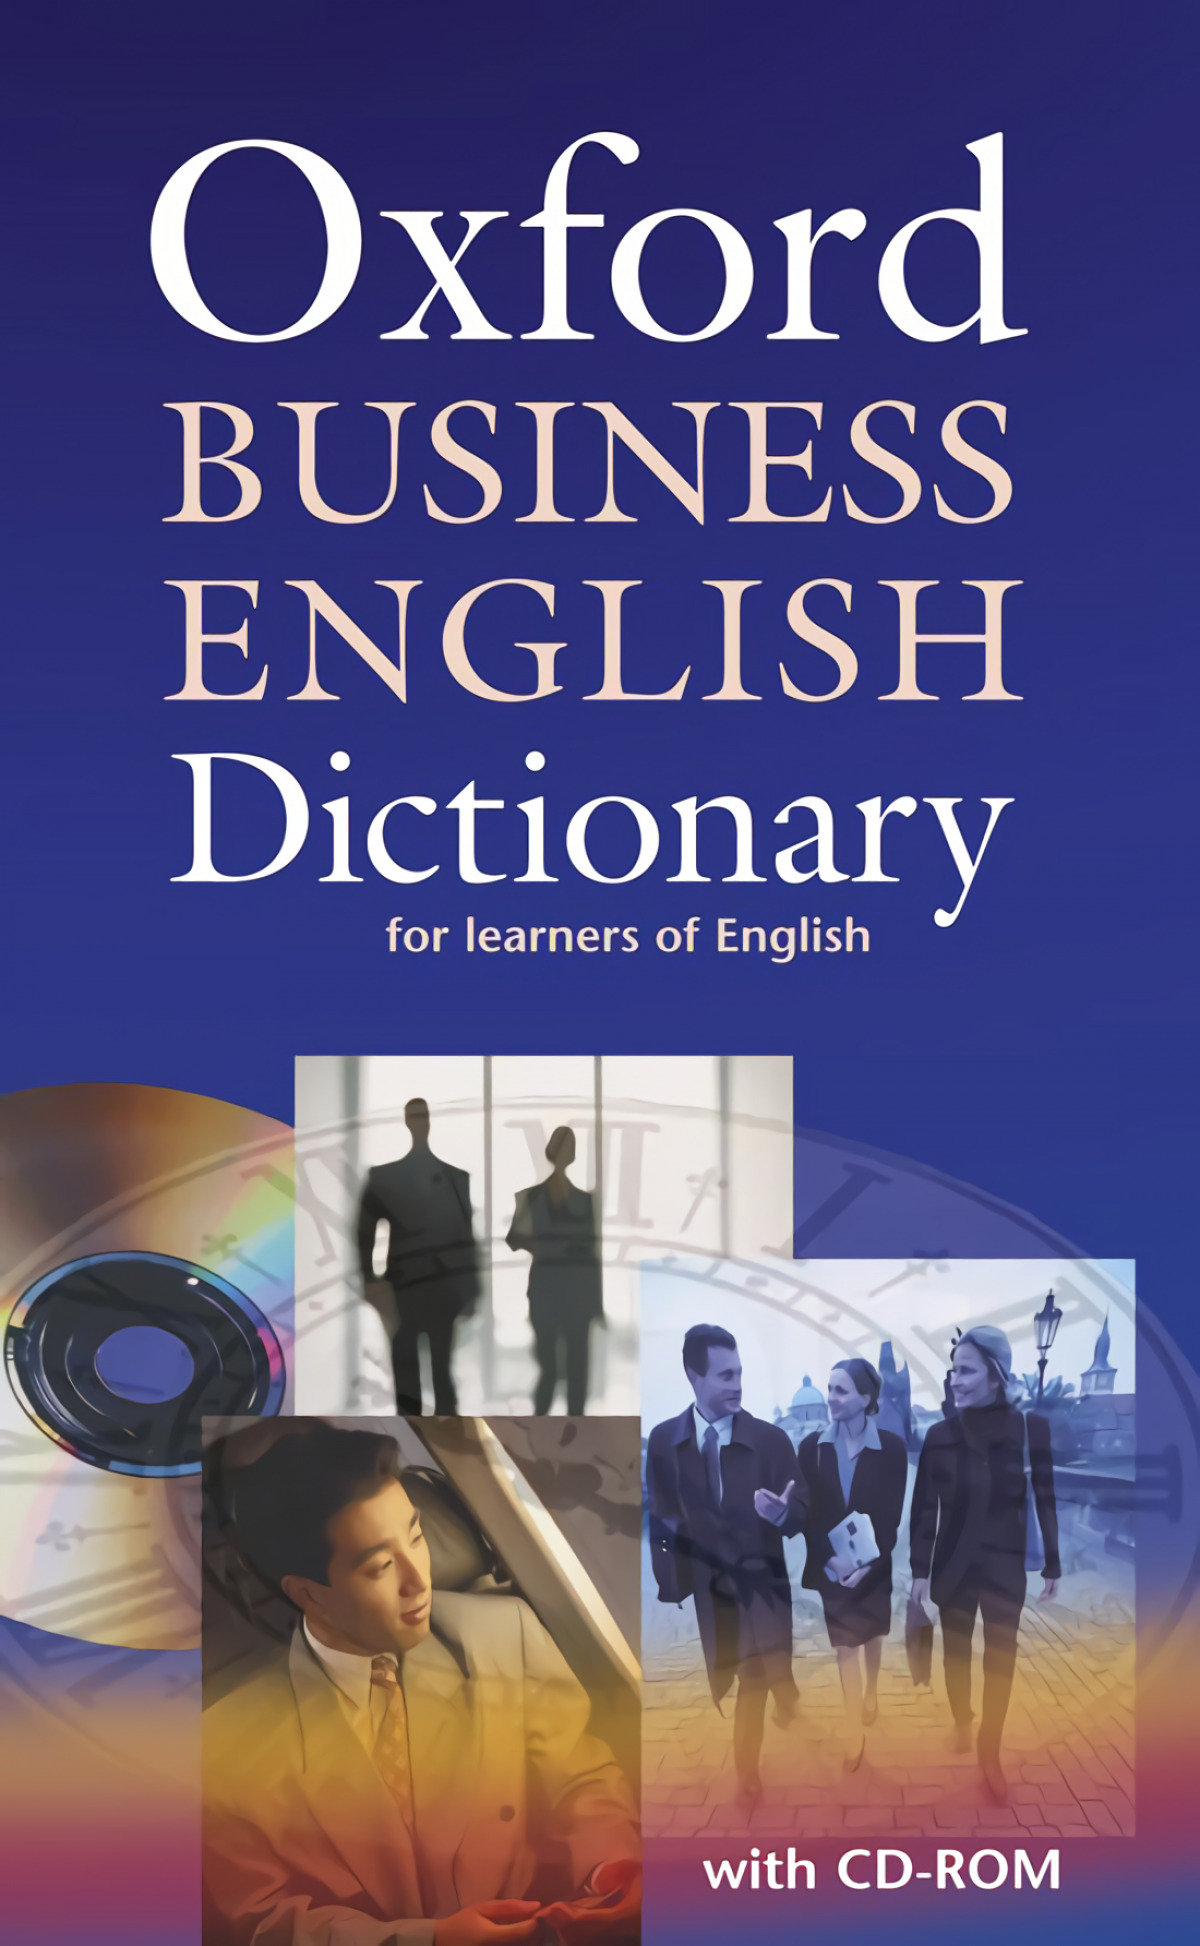 Oxford Business English Dictionary for Learners of English: